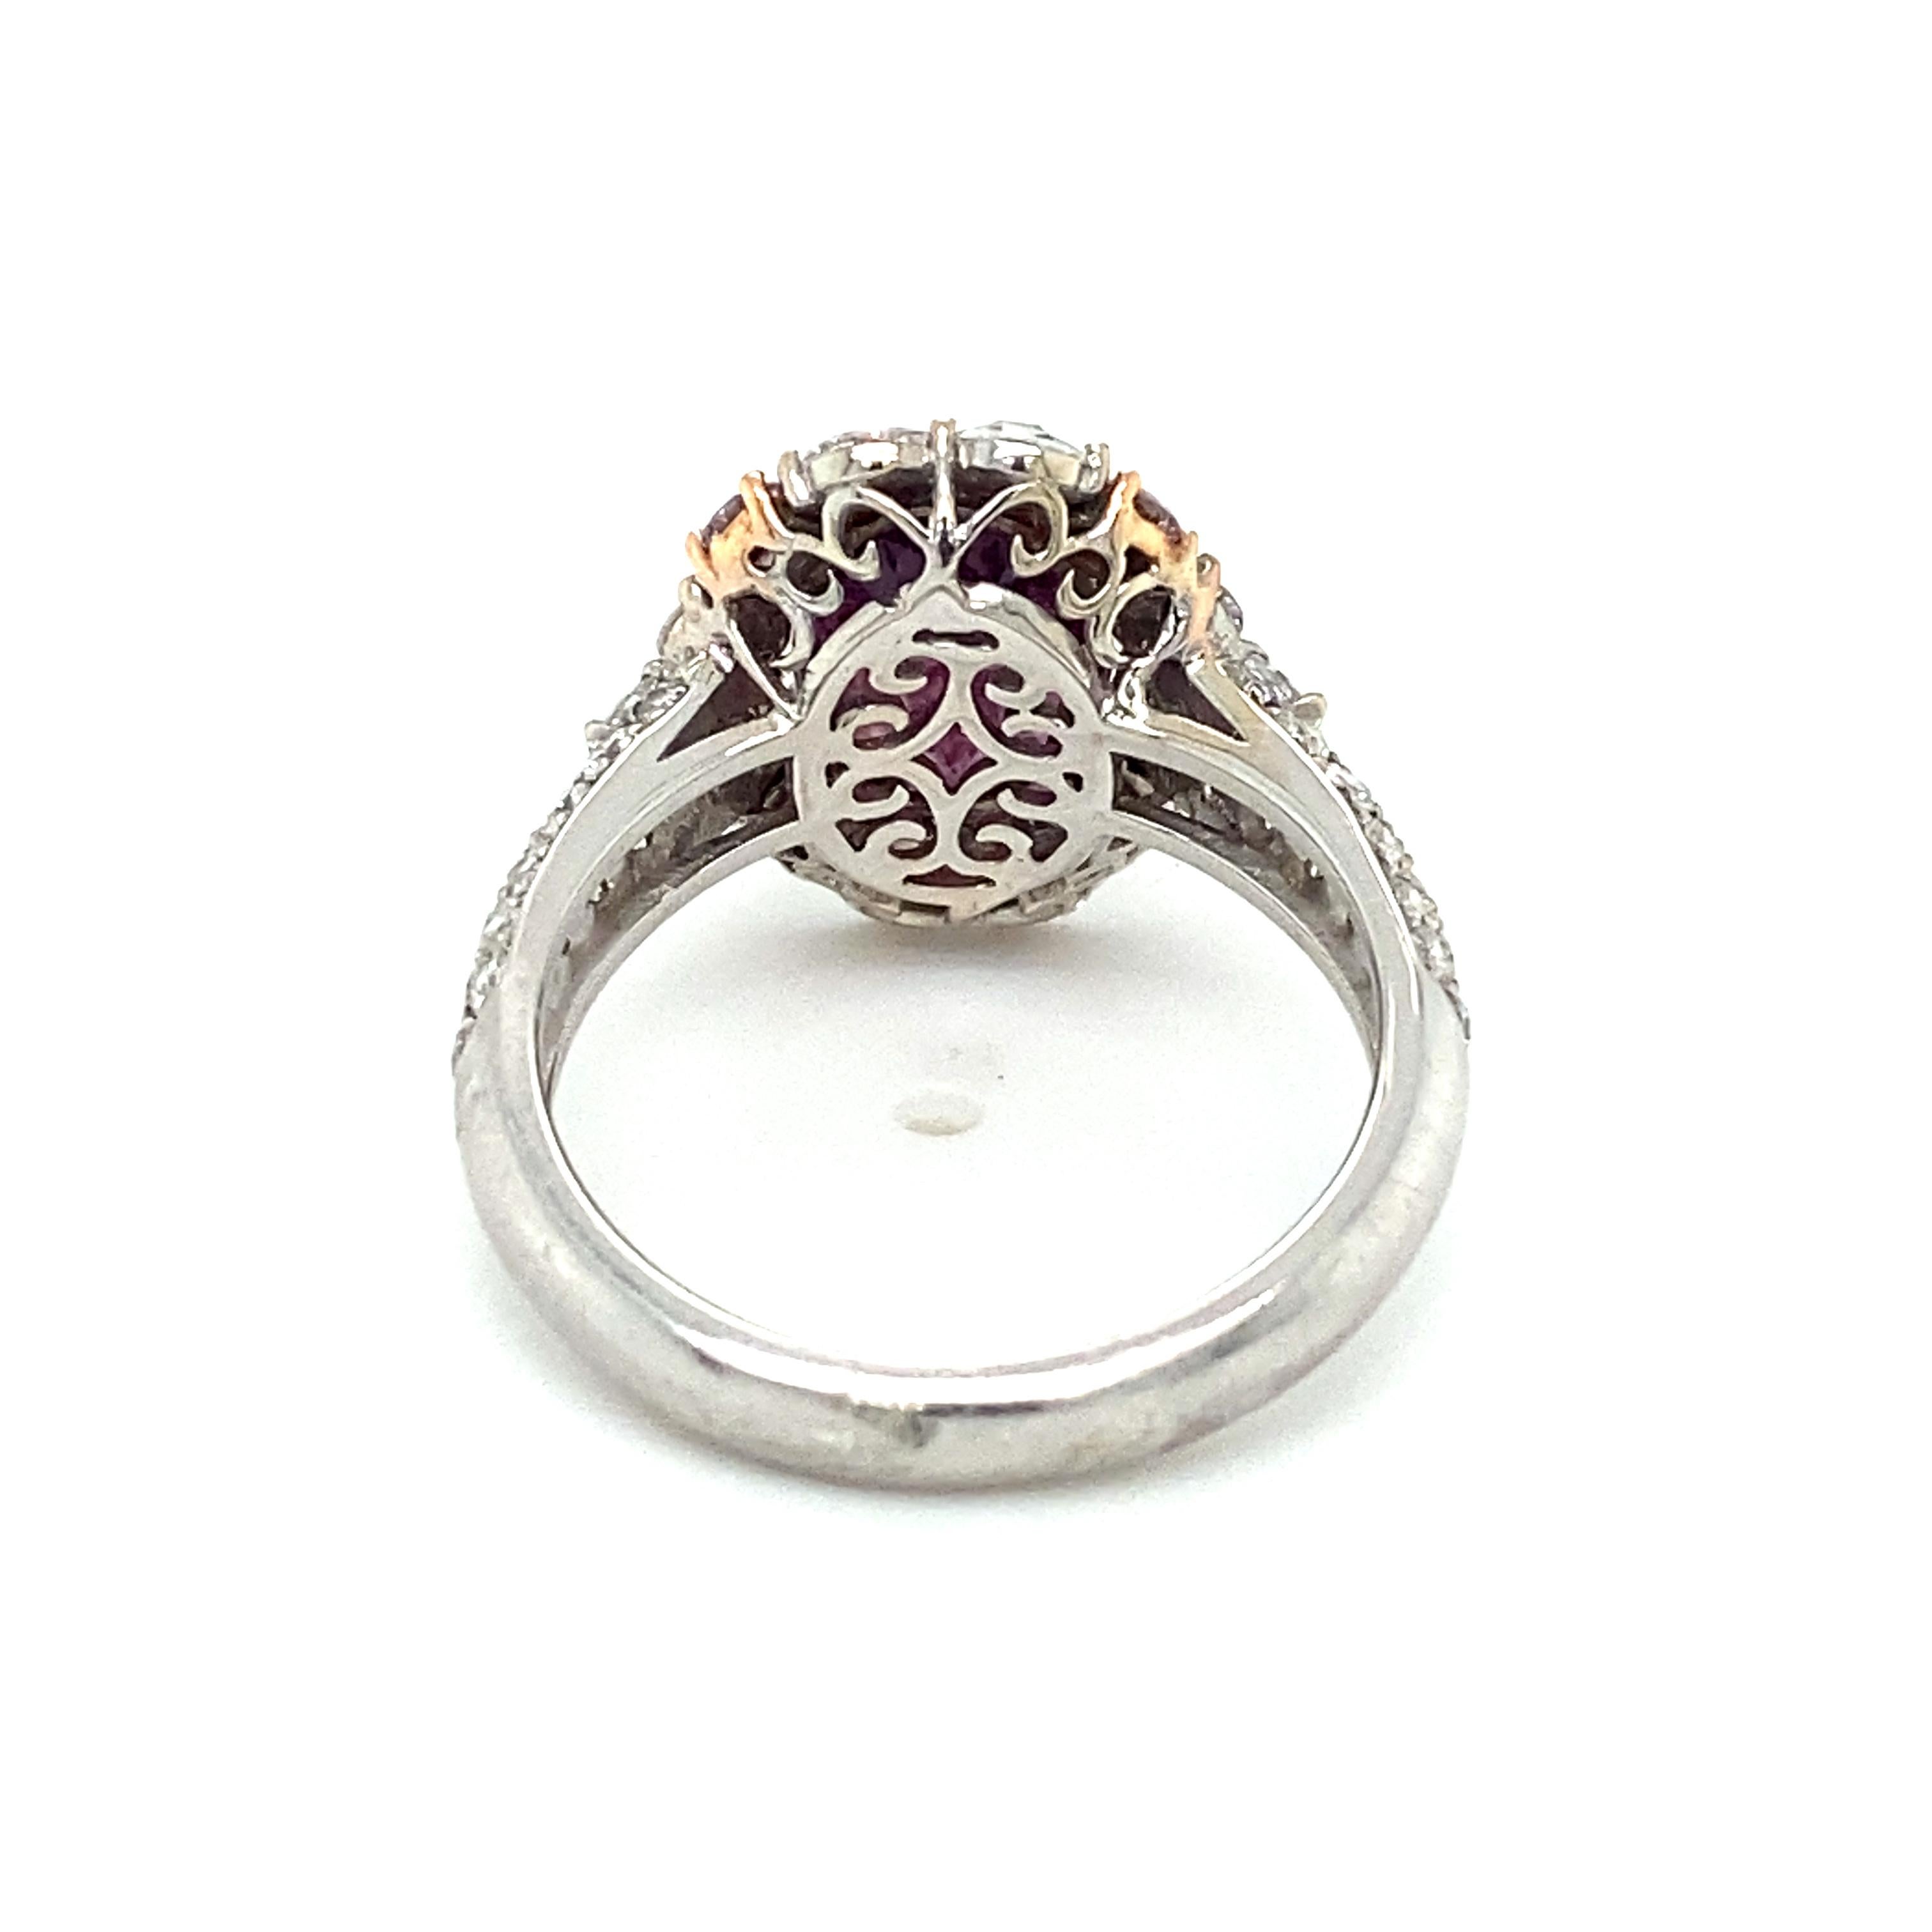 Item Details: This unique ring by Modani has a center oval purple-pink sapphire originating from Kashmir. It is surrounded and accented by both rose and round brilliant cut diamonds at approximately one and a half carats total.

Circa: 2000s
Metal